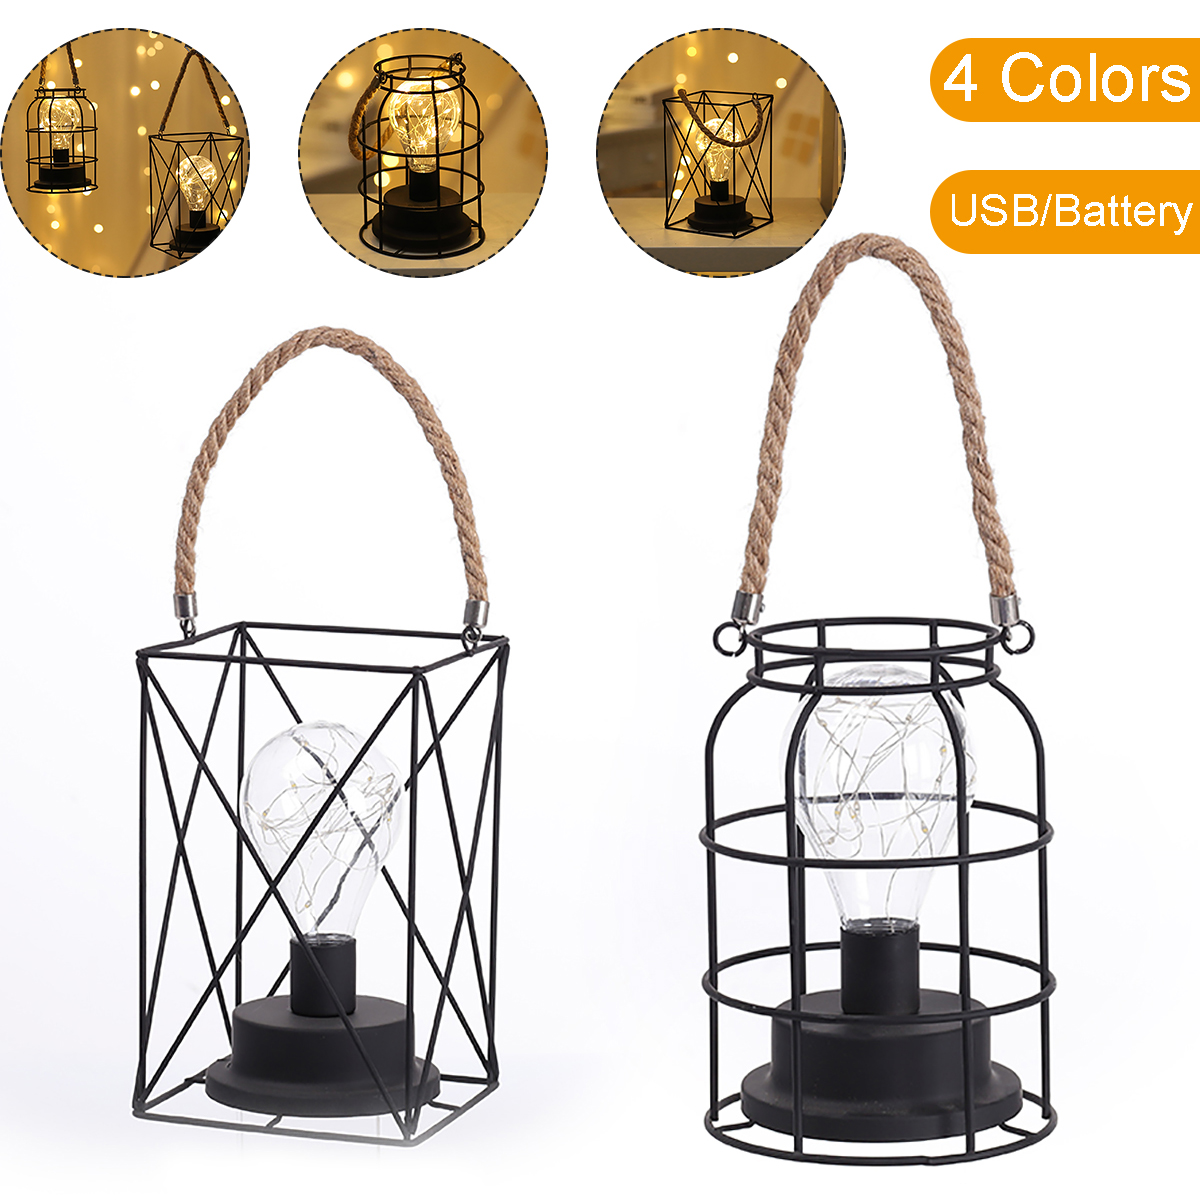 Retro-Cage-Light-Mini-Metal-Battery-Powered-LED-Bulb-Lamp-for-Living-Room-Bedroom-Kitchen-Wedding-Ch-1733946-1